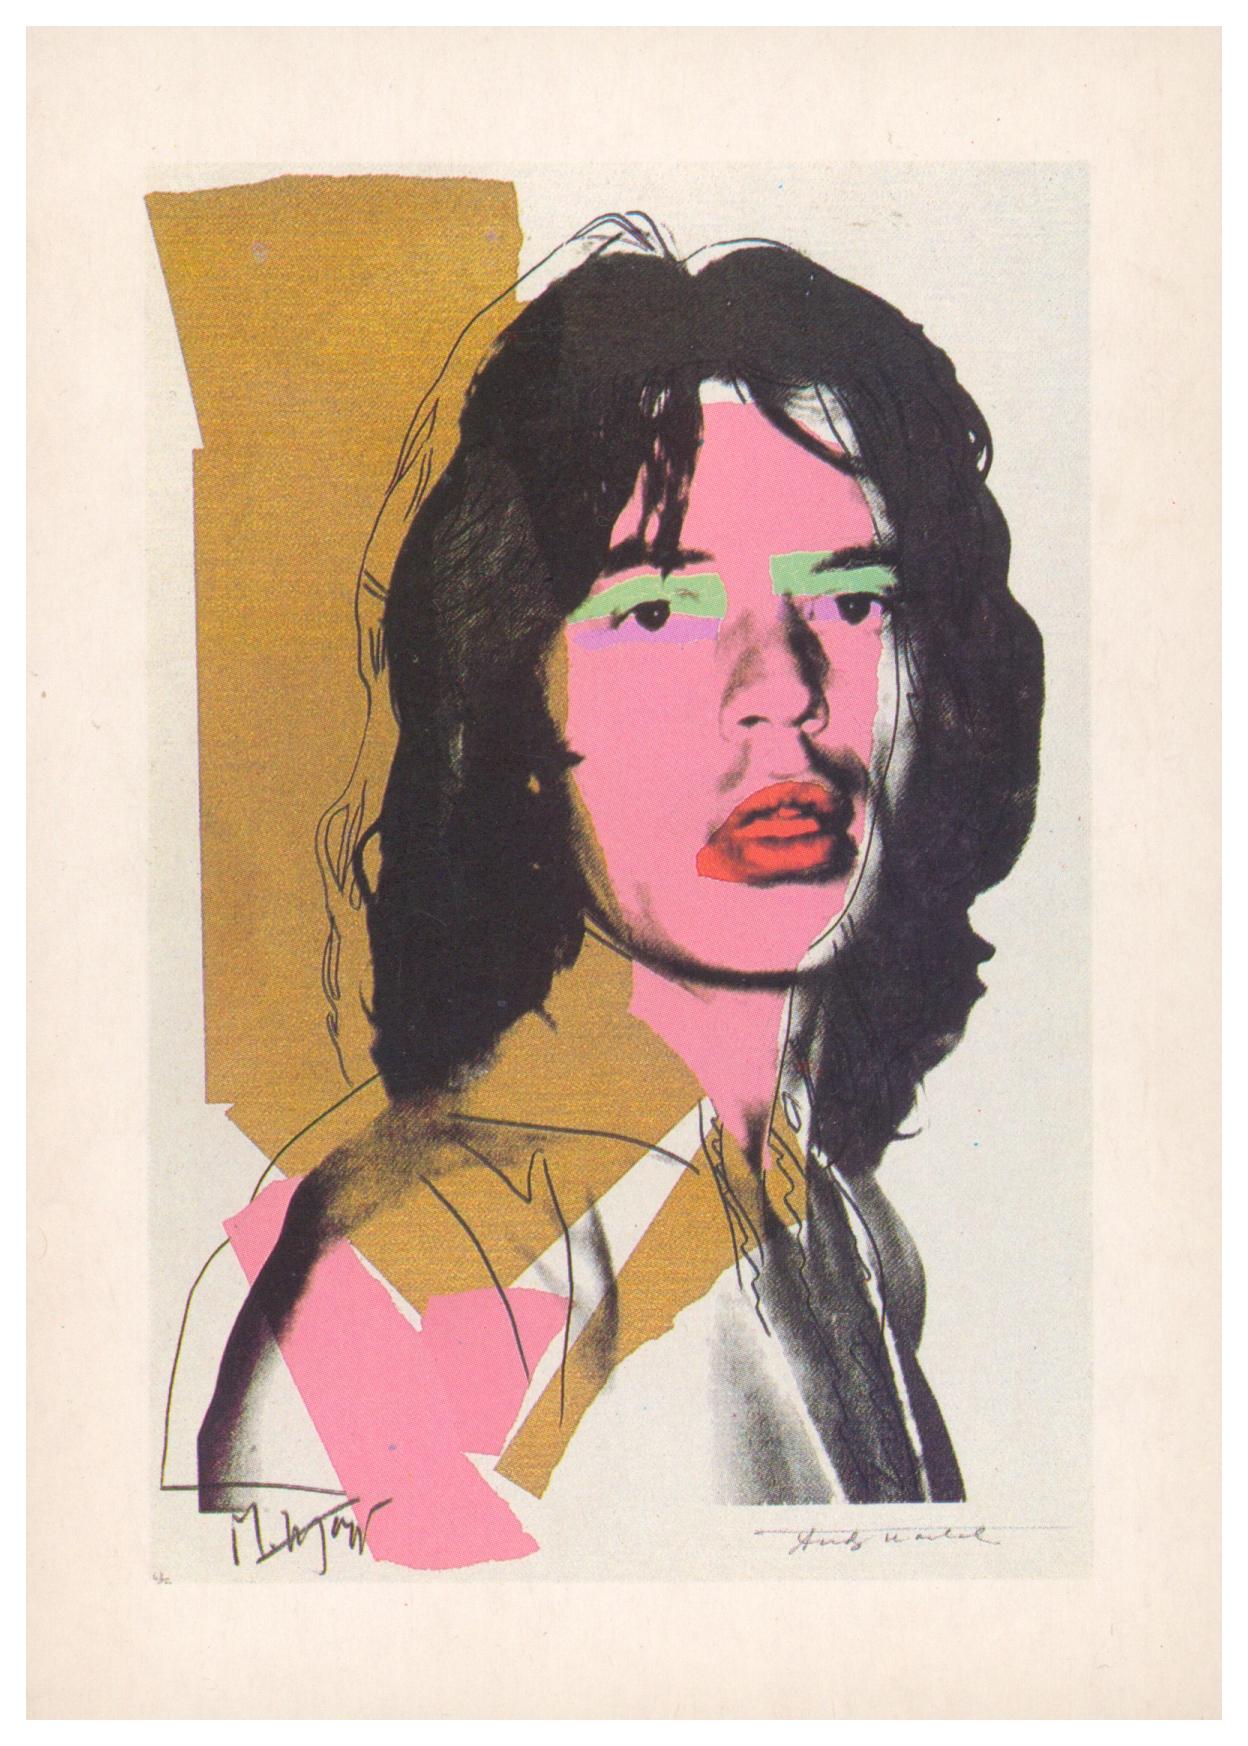 Andy Warhol Portrait screen-prints 1965-80 (announcement cards) - Print by (after) Andy Warhol